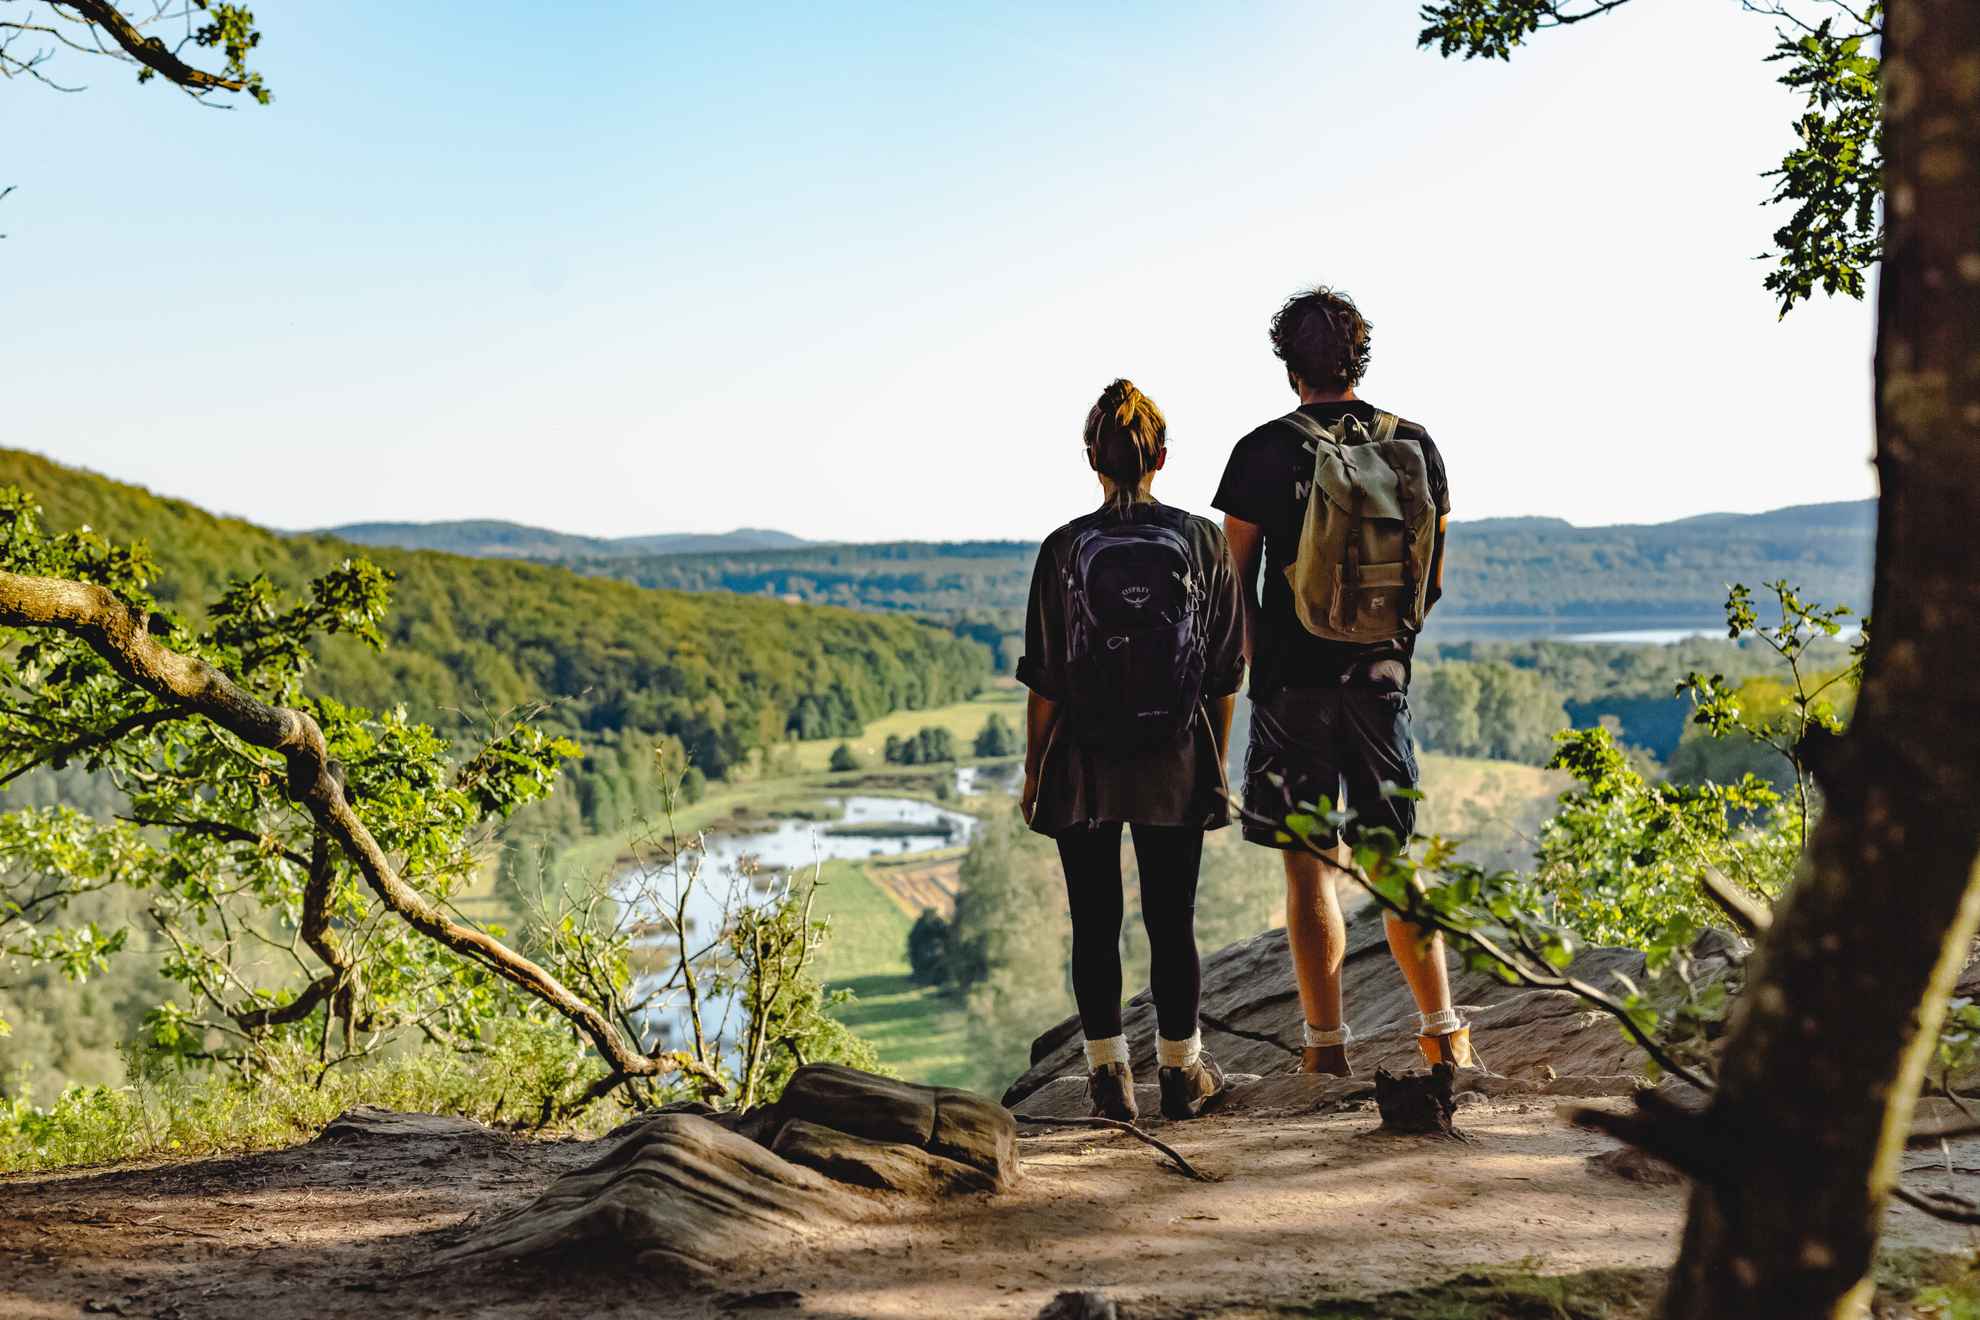 Two hikers standing on a hill, looking out over a green beech forest and a lake.